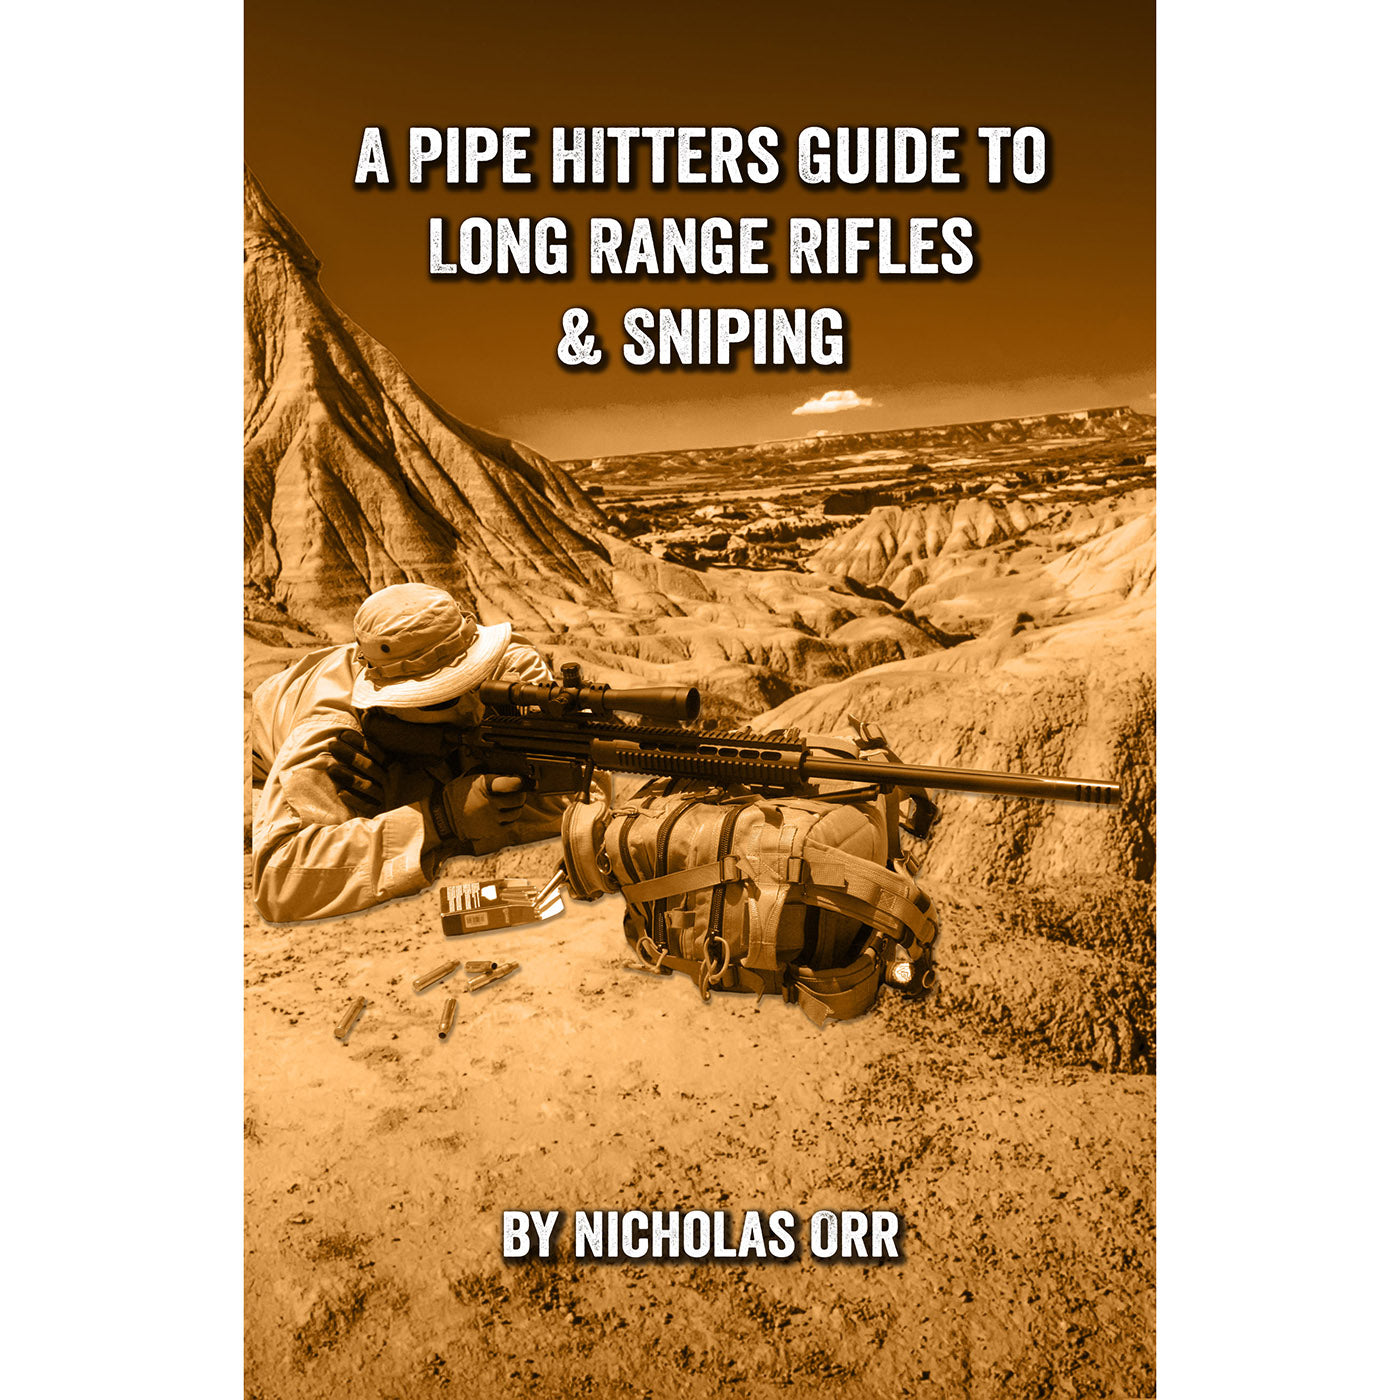 Pipe Hitters Guide to Long Range Rifles & Sniping (PHG Book 5)